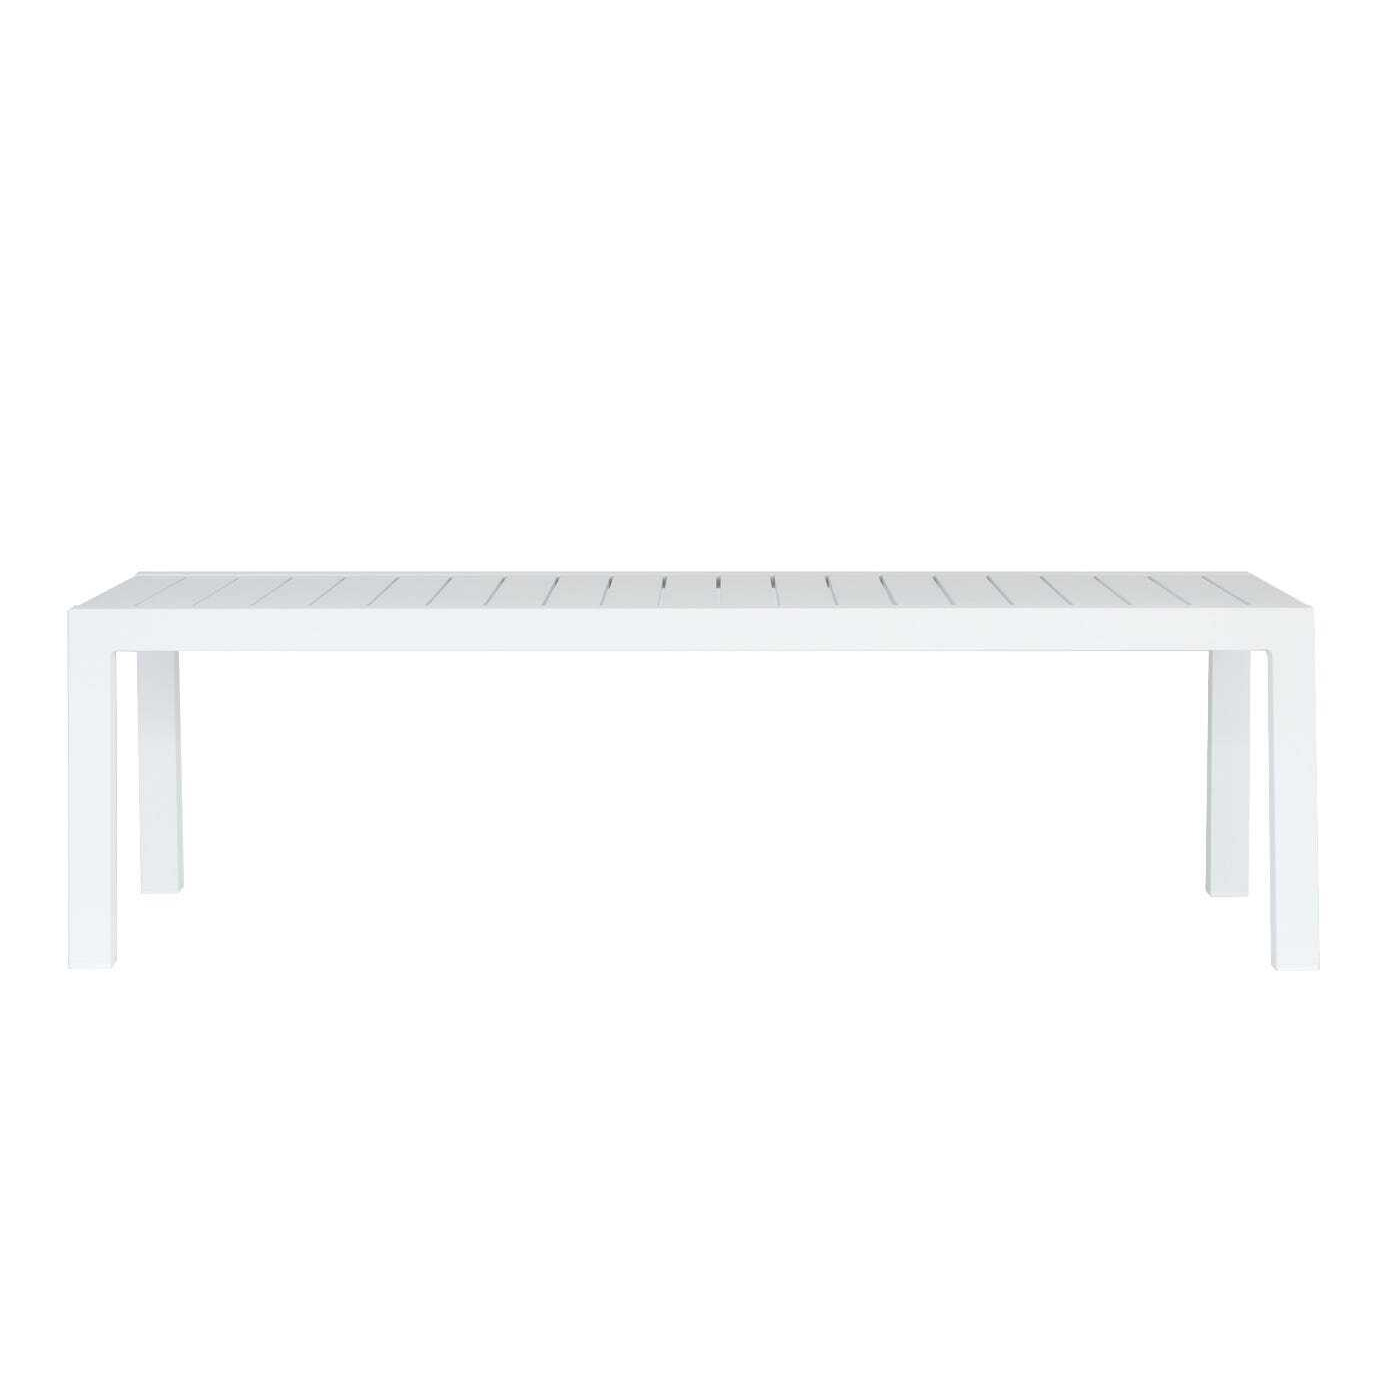 Case Eos Outdoor Bench in White - image 1